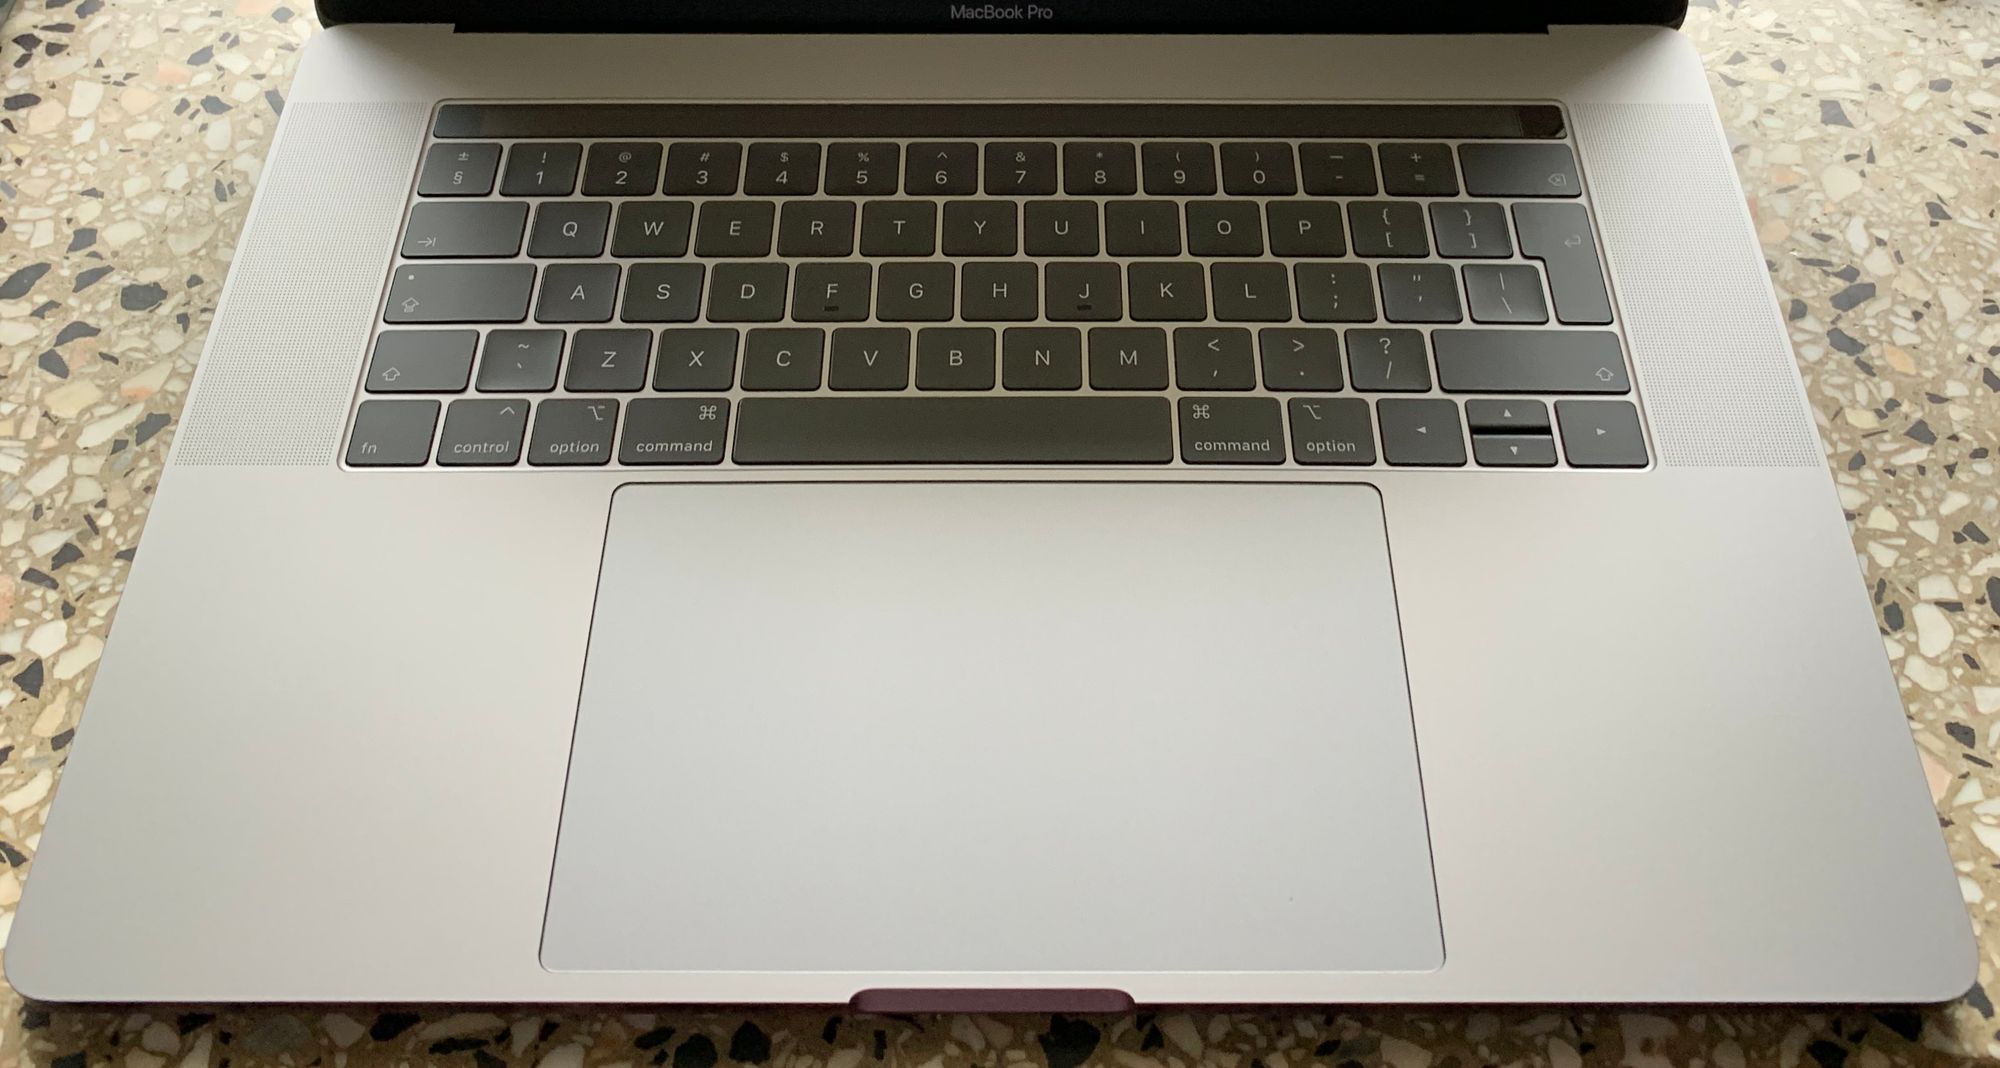 MacBook Pro 2019 review — the final product?